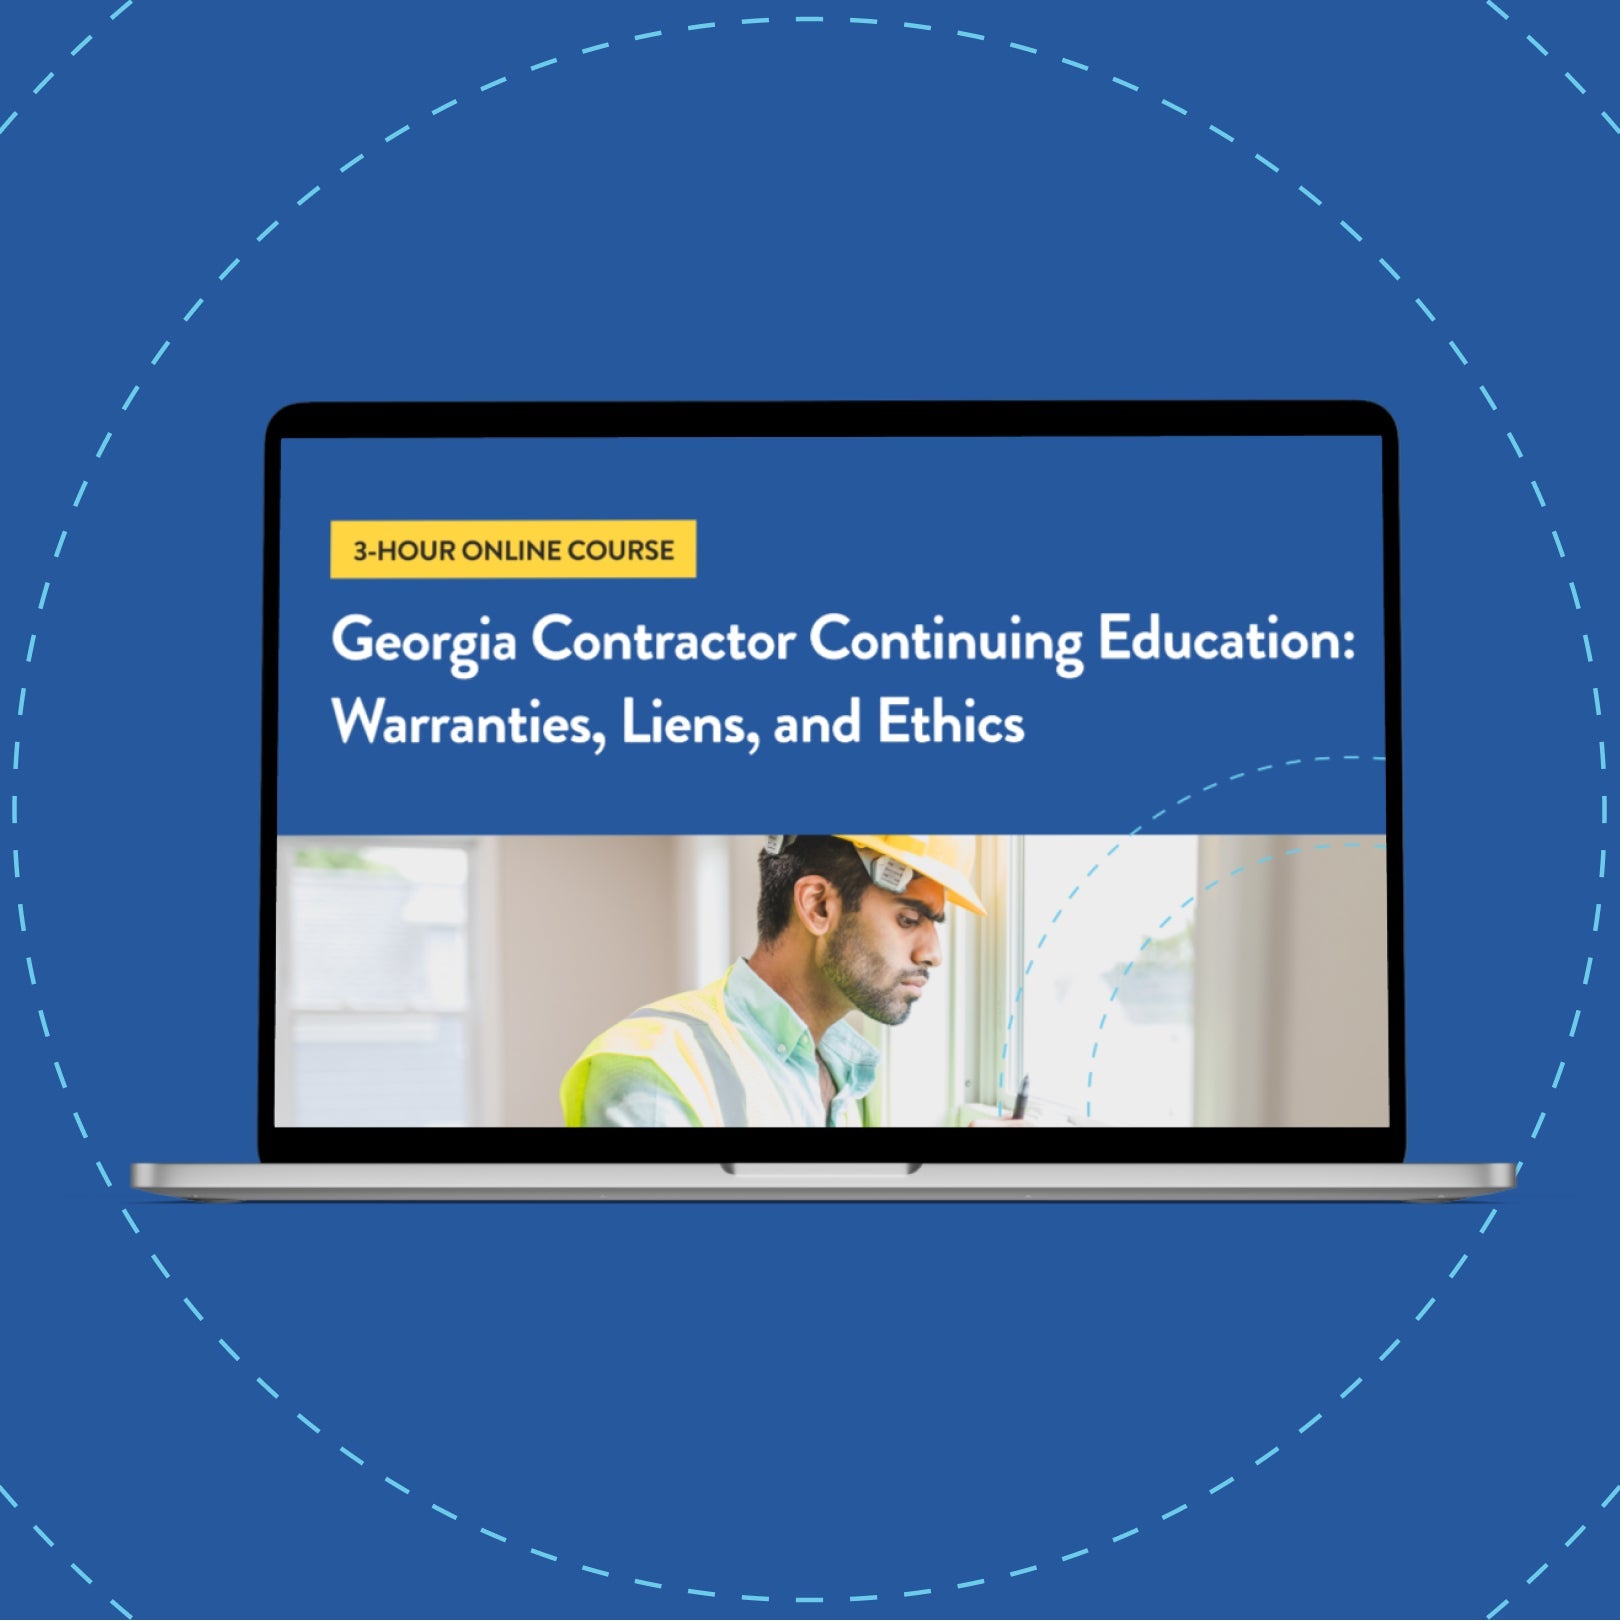 Georgia Contractor Continuing Education: Warranties, Liens, and Ethics - 3-Hour Online Course